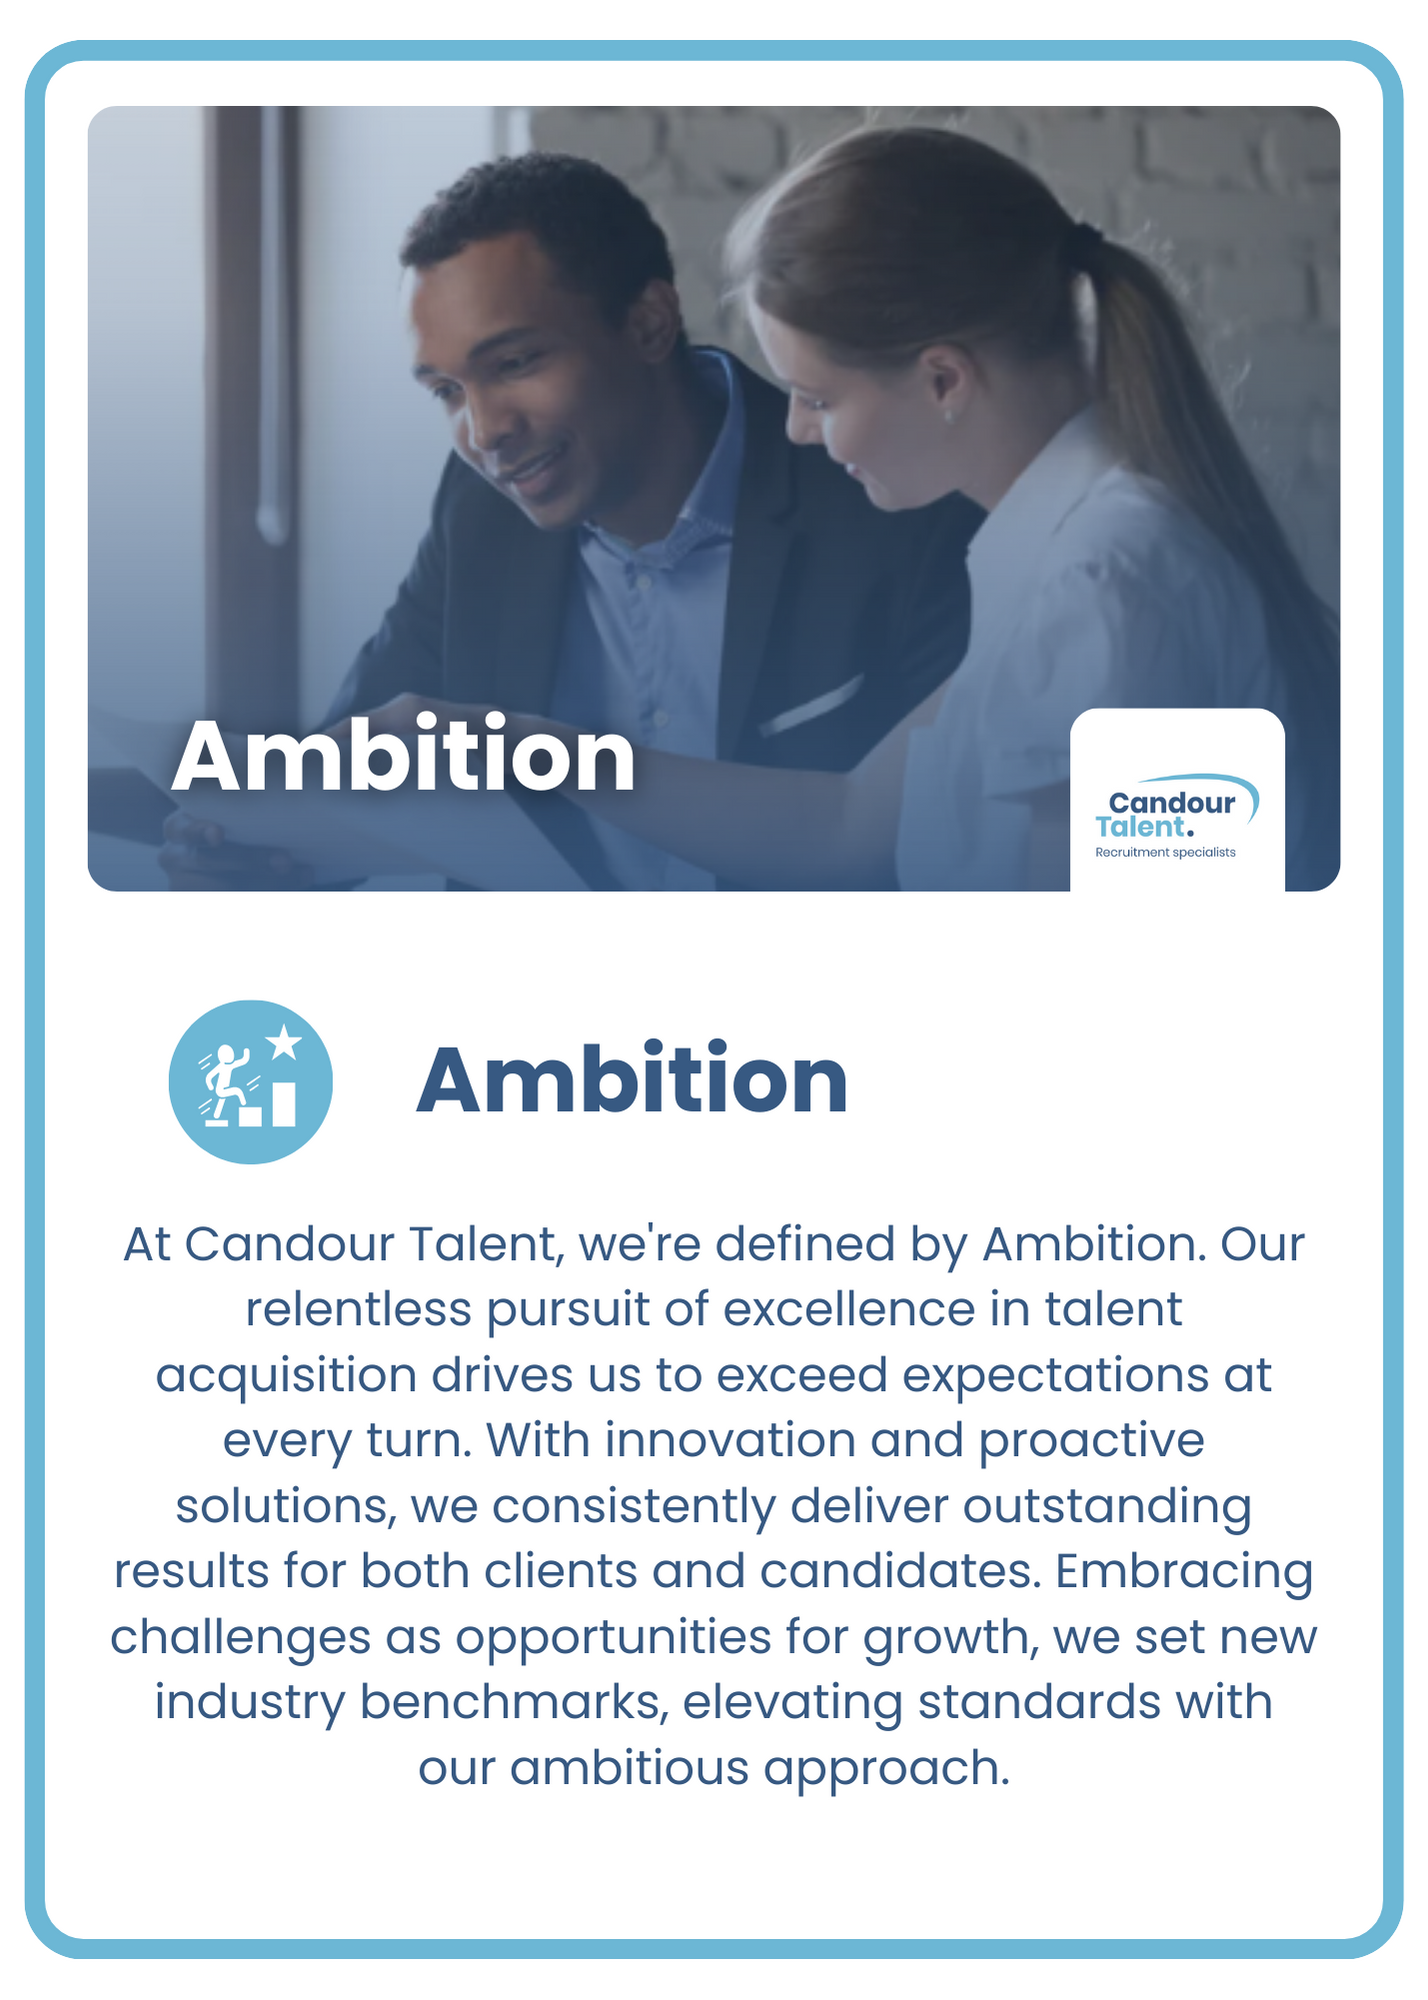 Candour Talent Recruitment Agency - Our Values page - our values of Ambition. Text: At Candour Talent, we're defined by Ambition. Our relentless pursuit of excellence in talent acquisition drives us to exceed expectations at every turn. With innovation and proactive solutions, we consistently deliver outstanding results for both clients and candidates. Embracing challenges as opportunities for growth, we set new industry benchmarks, elevating standards with our ambitious approach.